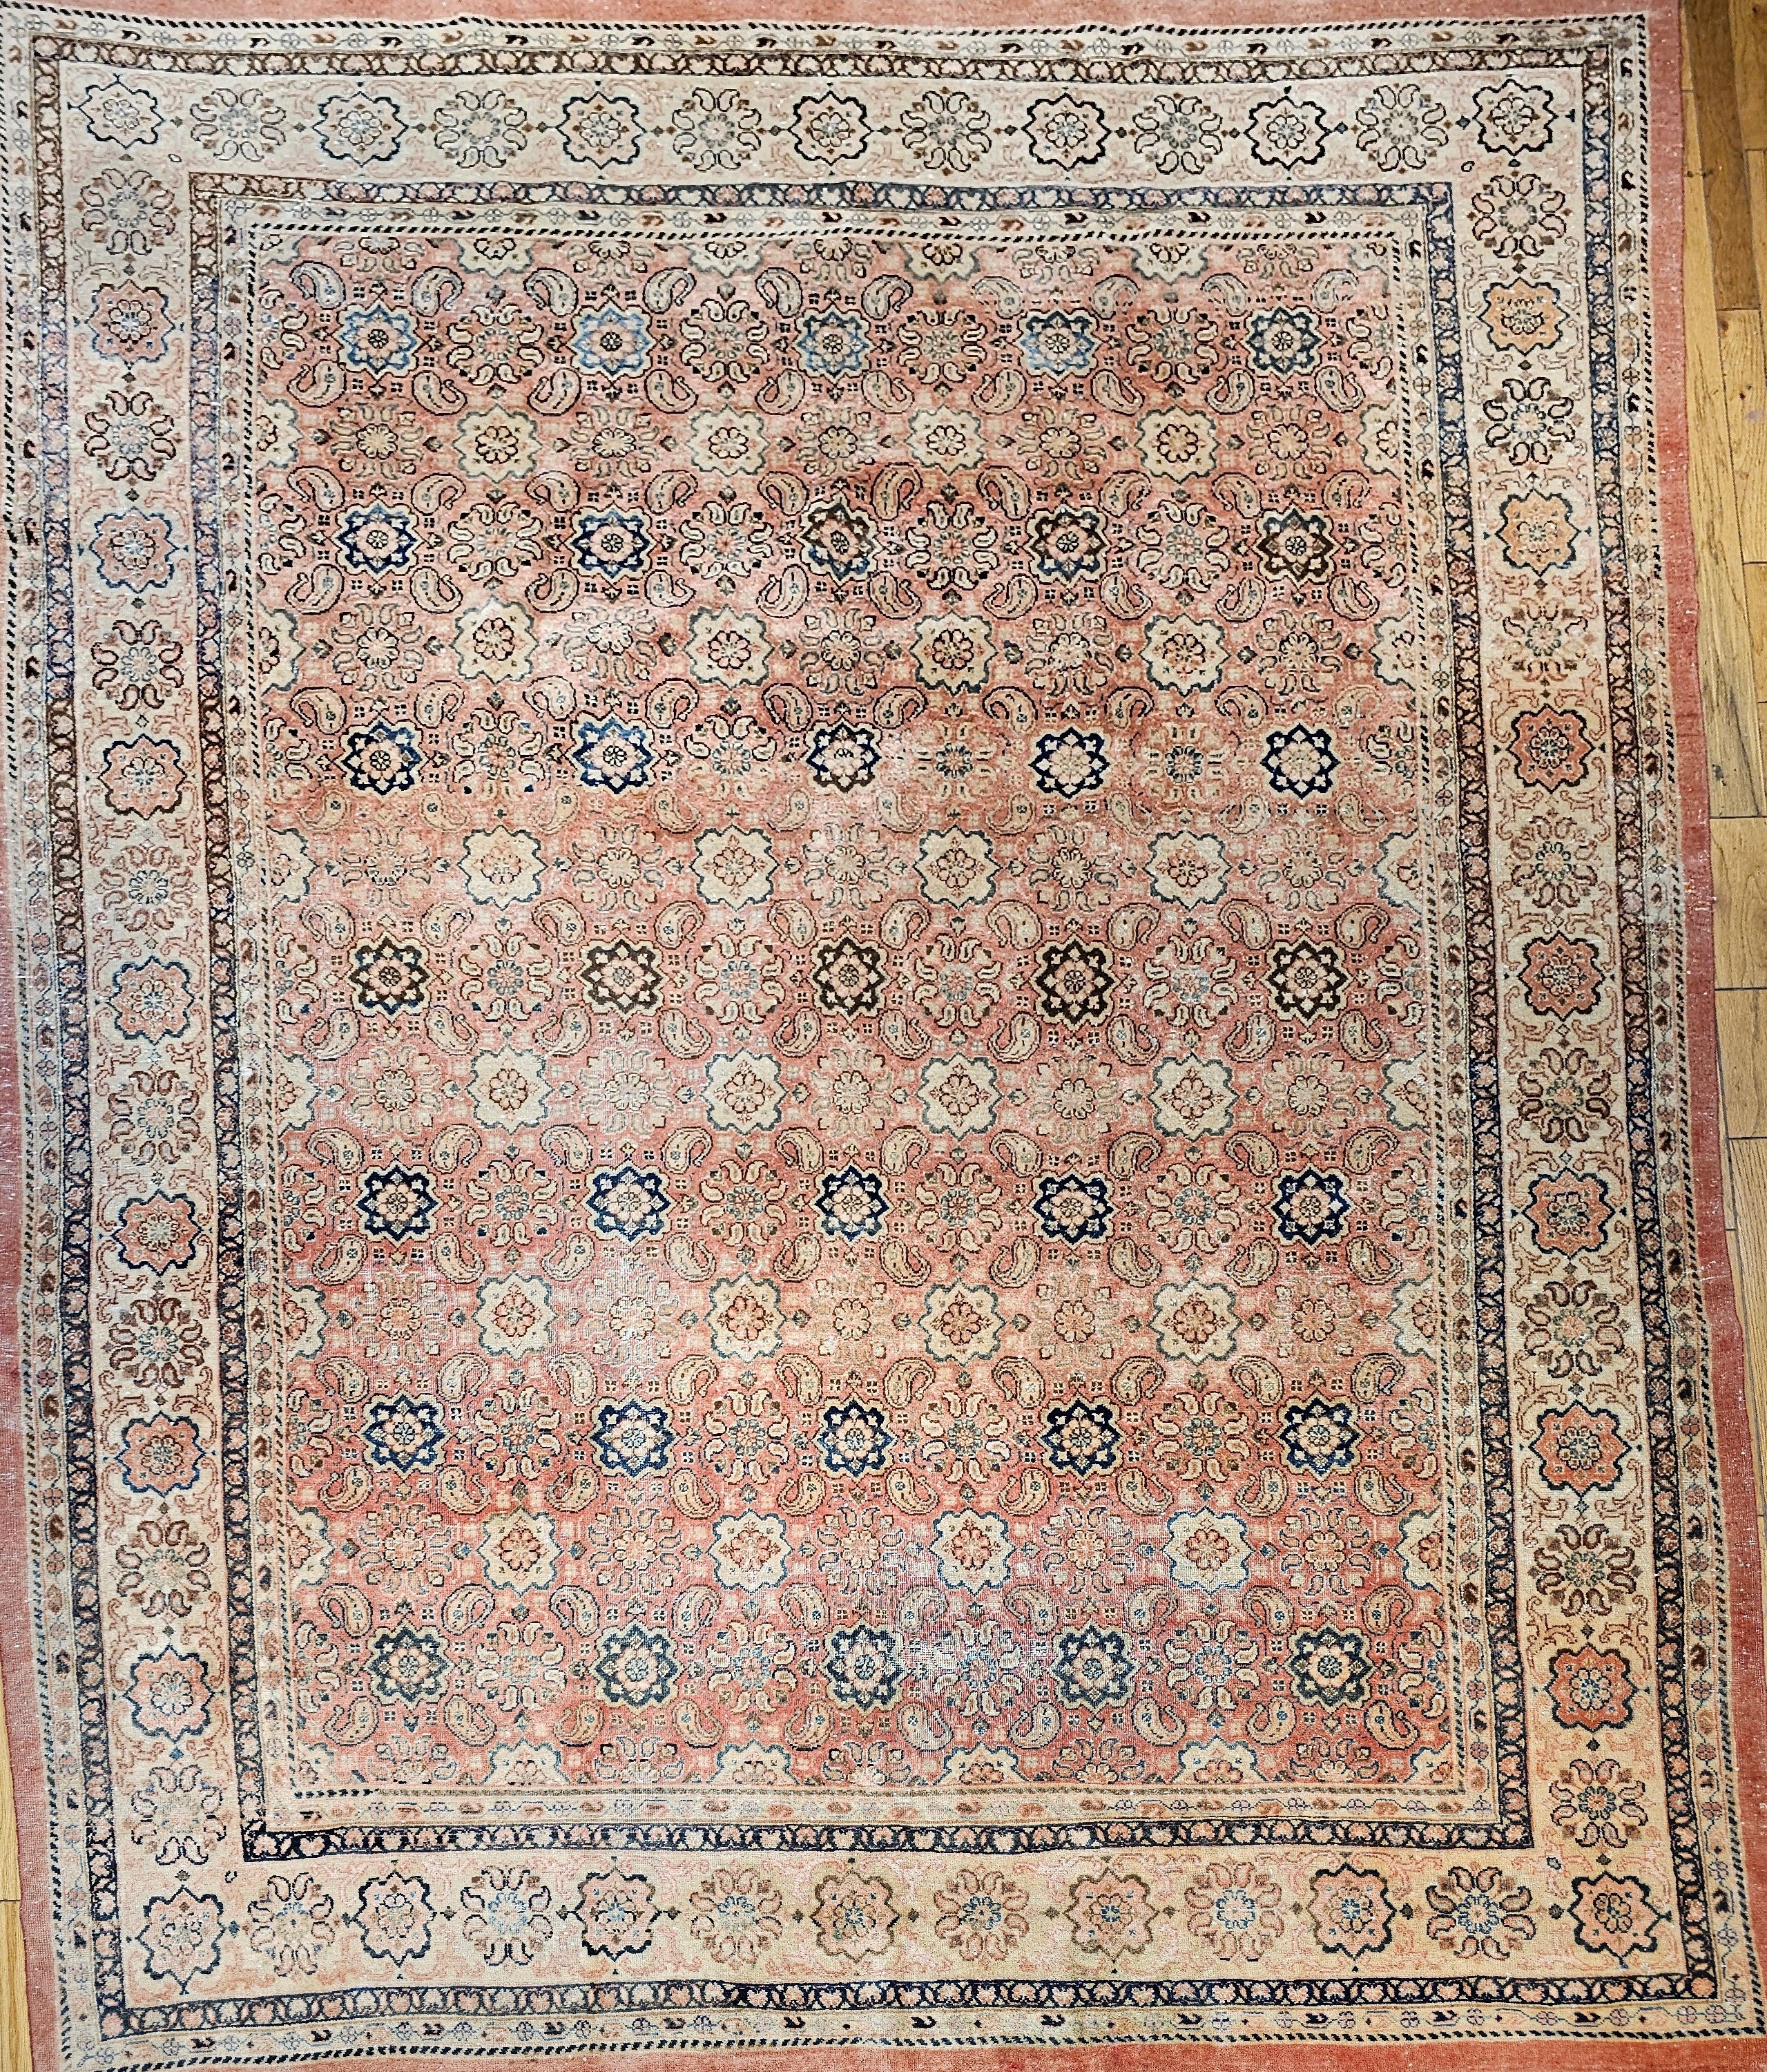 Vintage Mahal Sultanabad Rug in All Over Geometric Pattern in Pale Pink, Cream